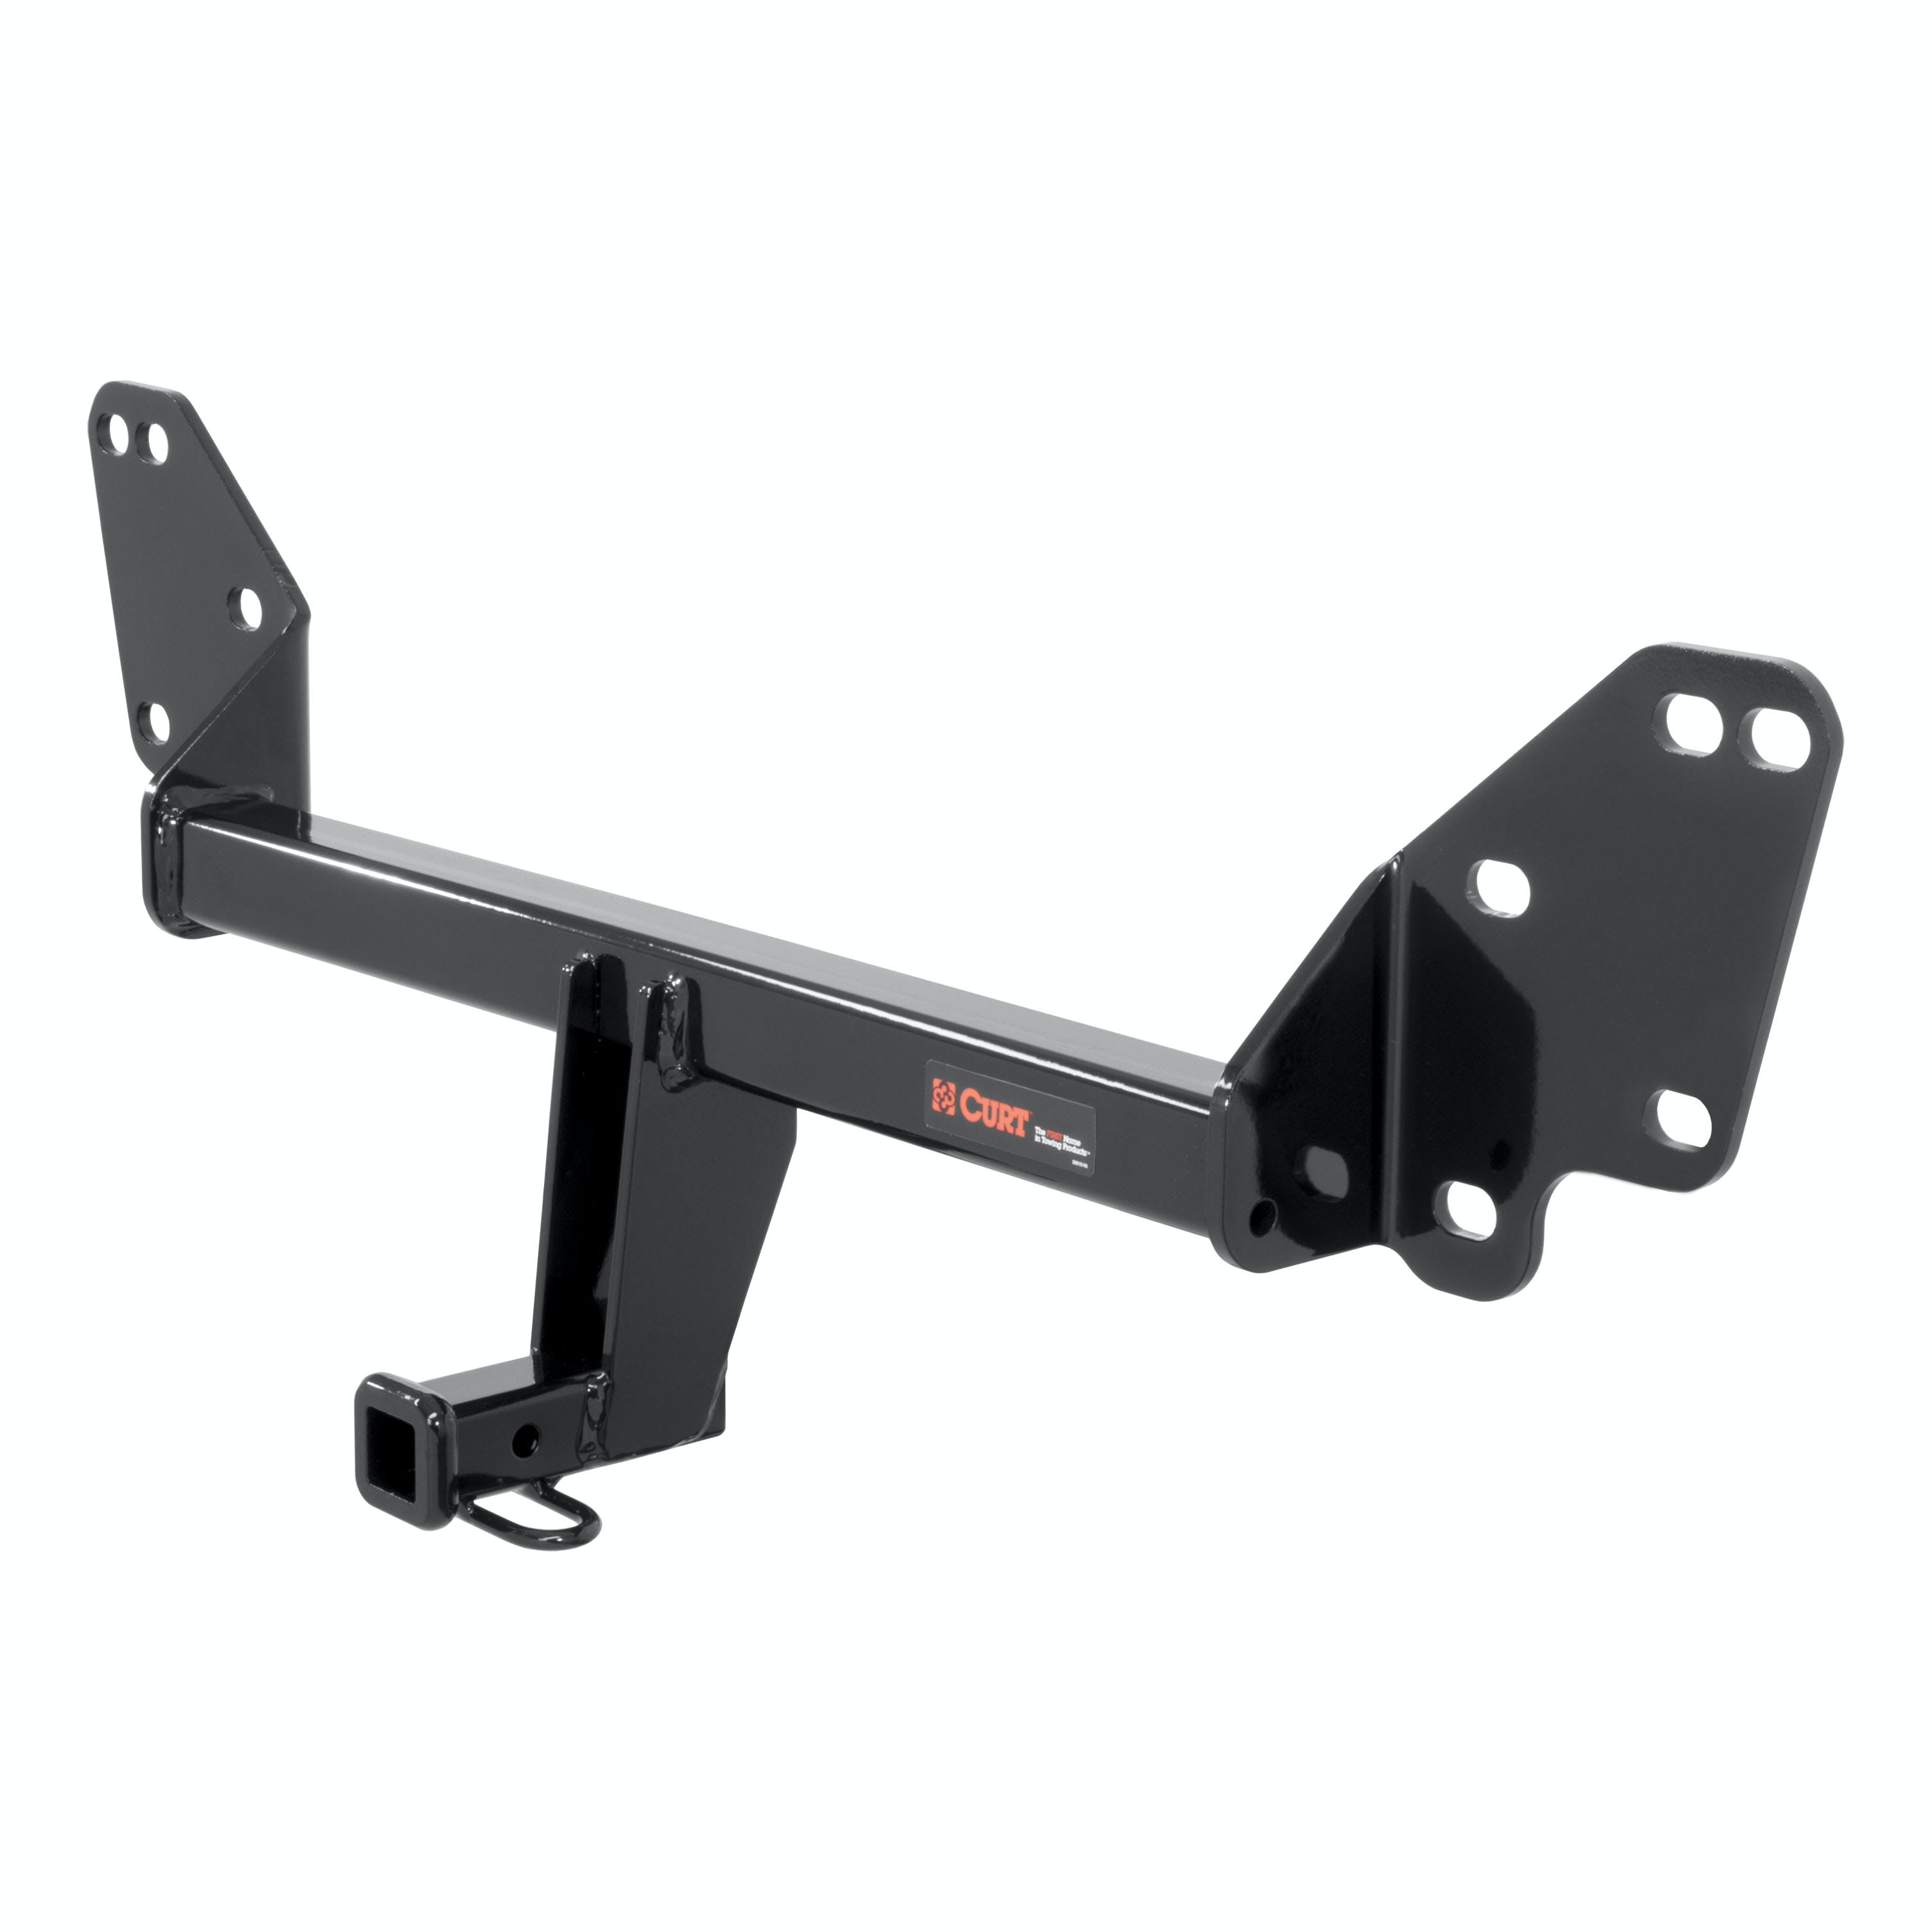 CURT 11900 Class 1 Hitch, 1-1/4 Receiver, Select Camaro, Cadillac CTS (Fascia Trimming)